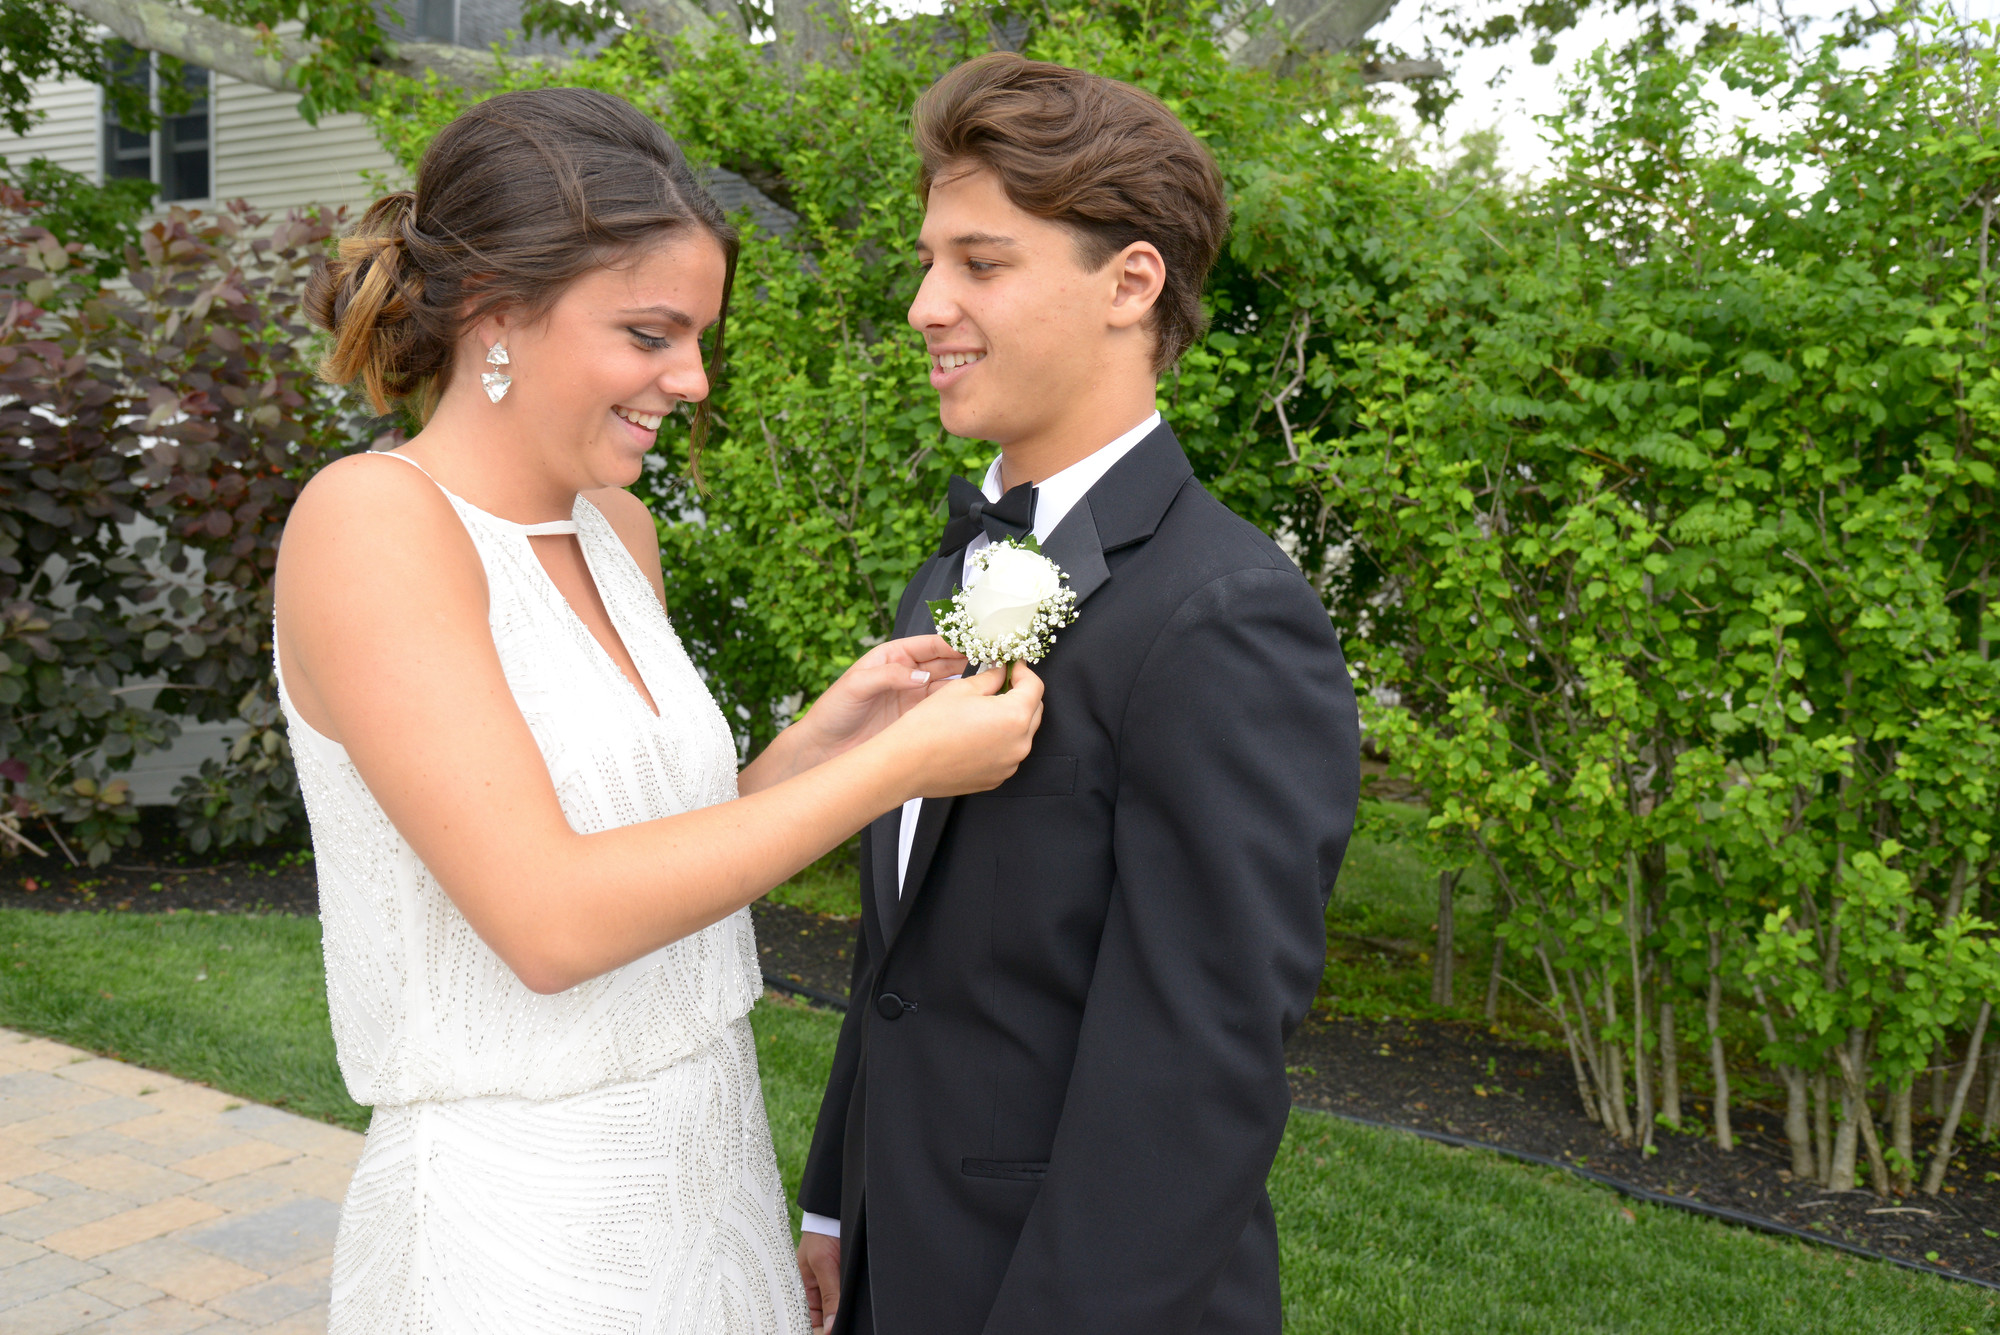 Photos by Penny Frondelli/Herald
Bridget Caslowitz placed a boutonniere on Max Willard’s lapel at a pre-prom gathering at Jack Kaplan’s house.